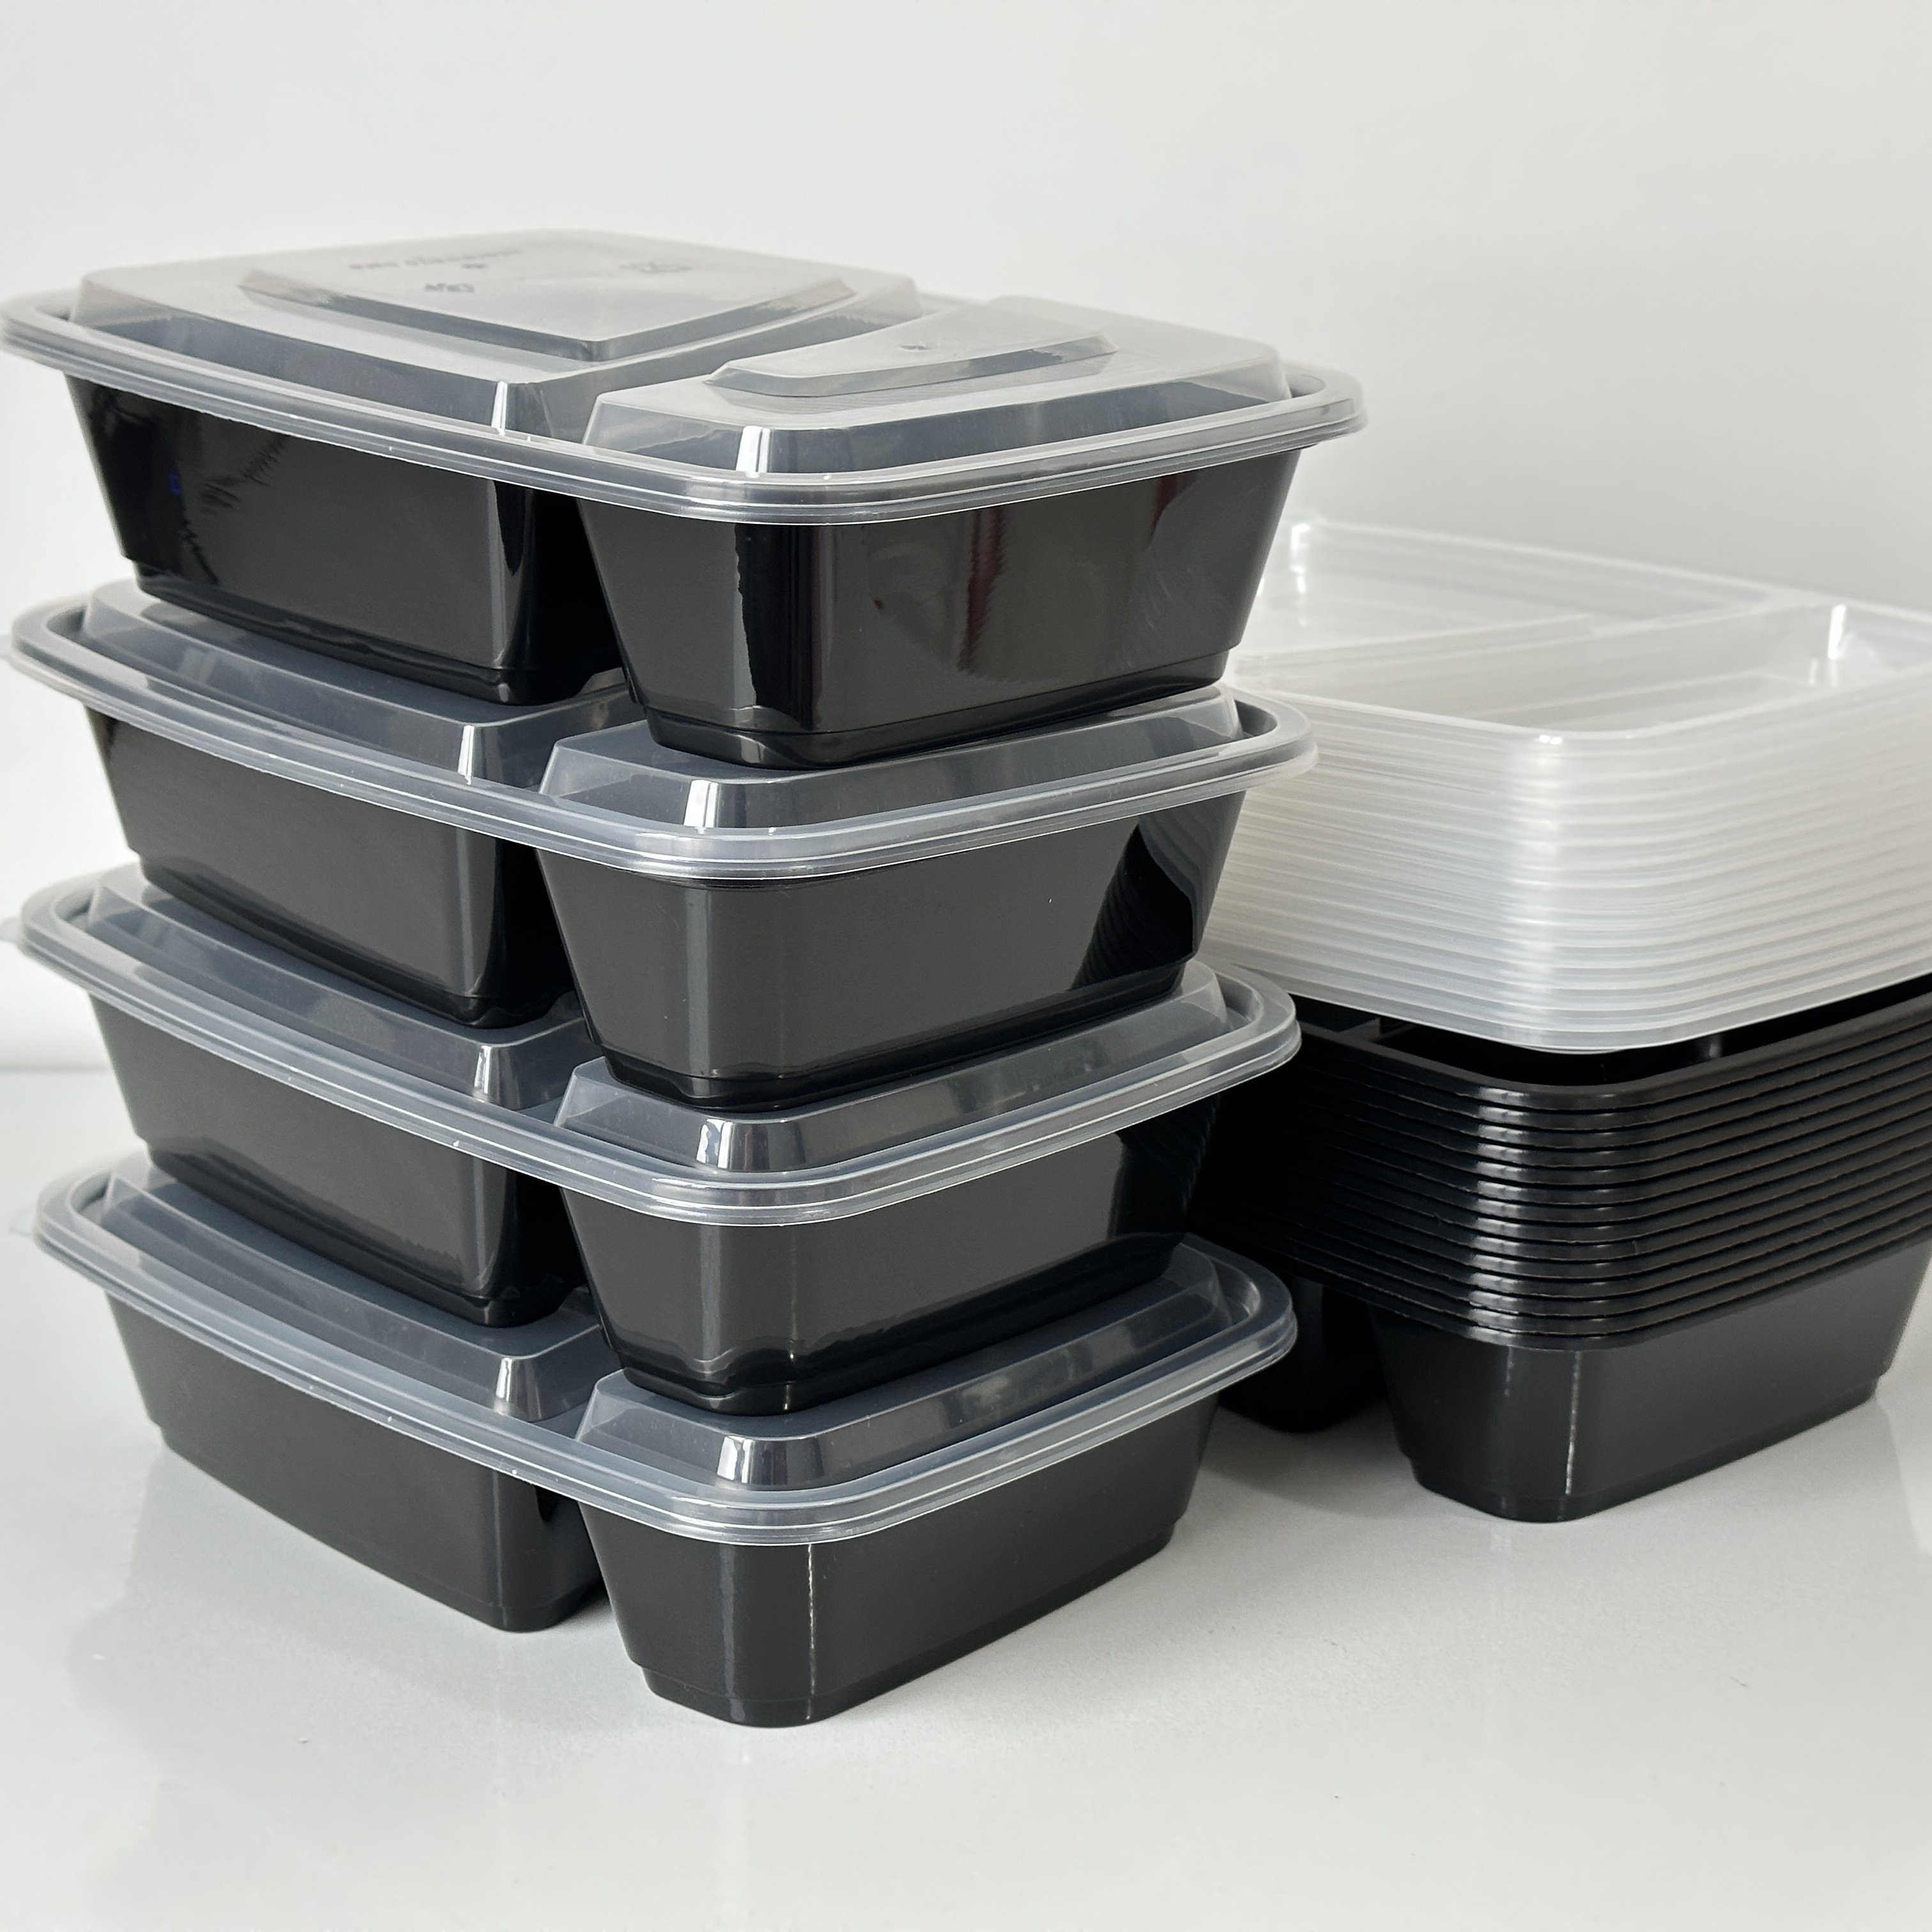 50 Pack, 2 Size] Food Storage Containers with Lids,16oz, 32oz Plastic  Airtight Deli Food Containers w Spoons, Microwave Freezer Food Container,  BPA-Free Dishwasher Leakproof Clear Takeout Meal Preps